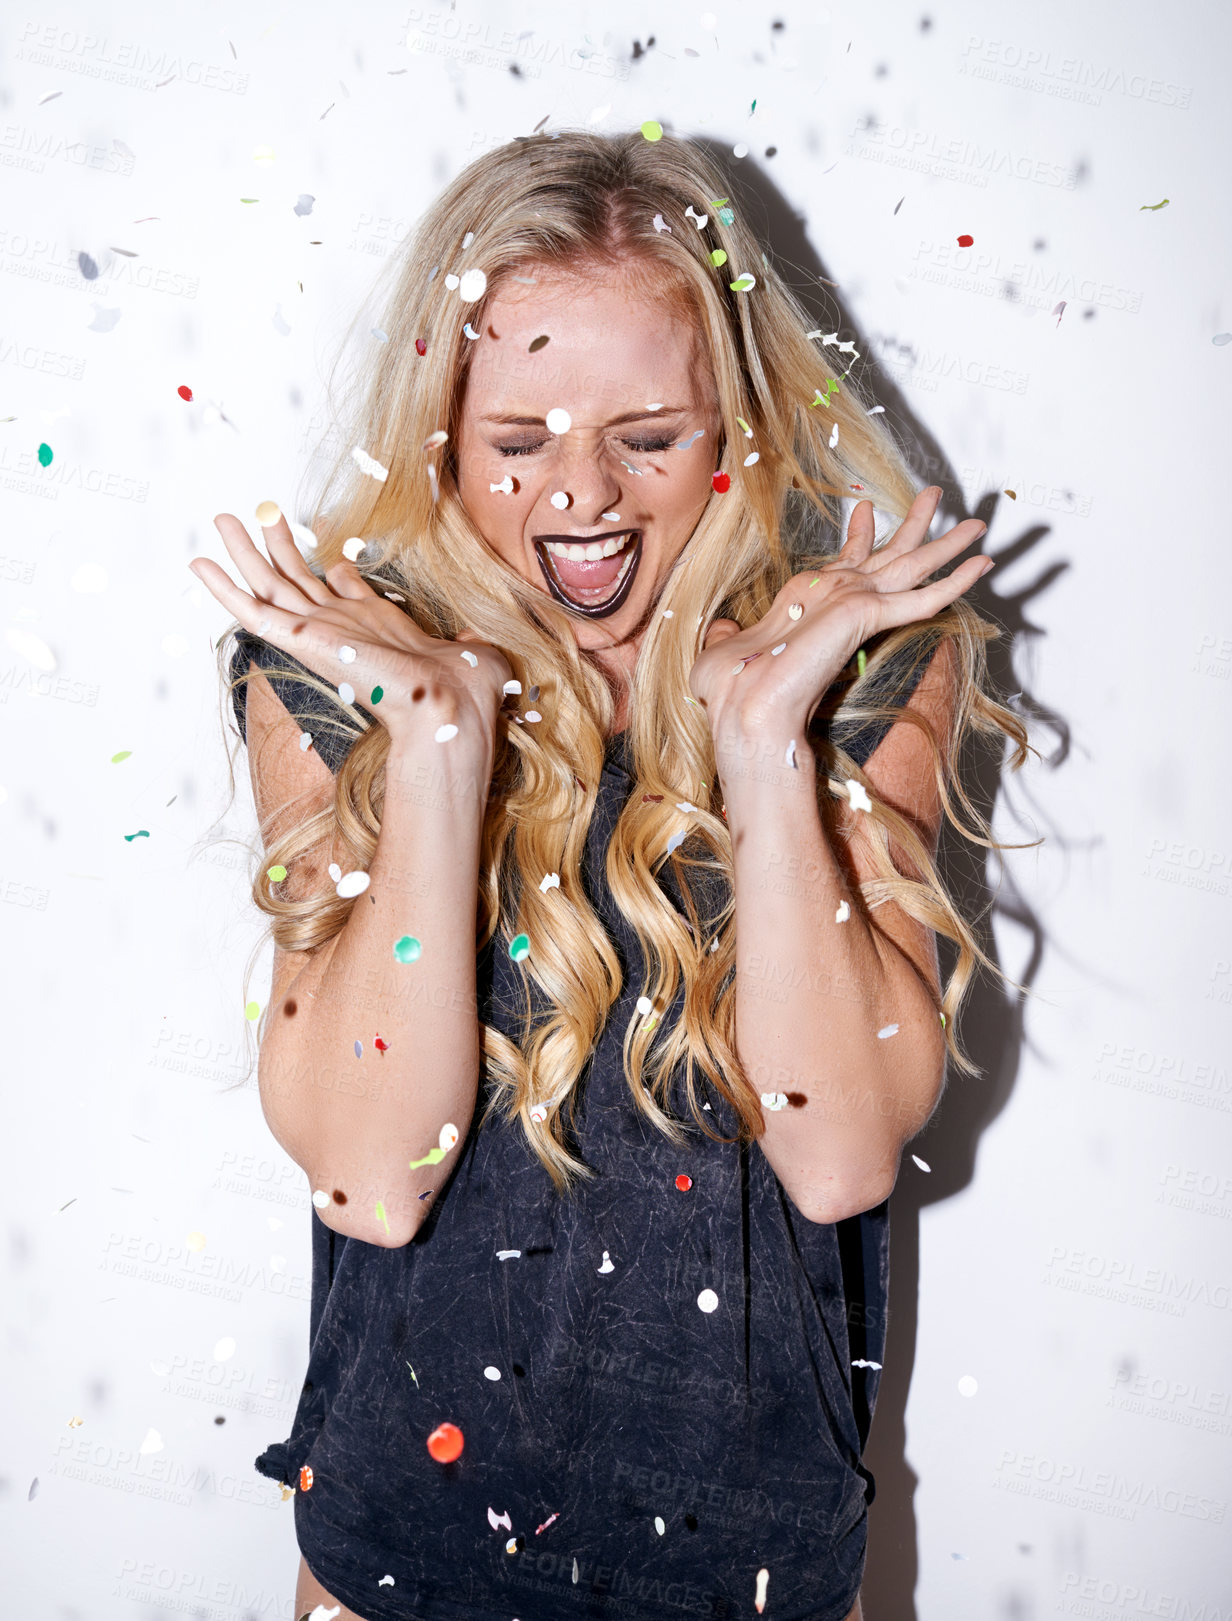 Buy stock photo Shot of an attractive young woman shouting in excitement as confetti falls down on her